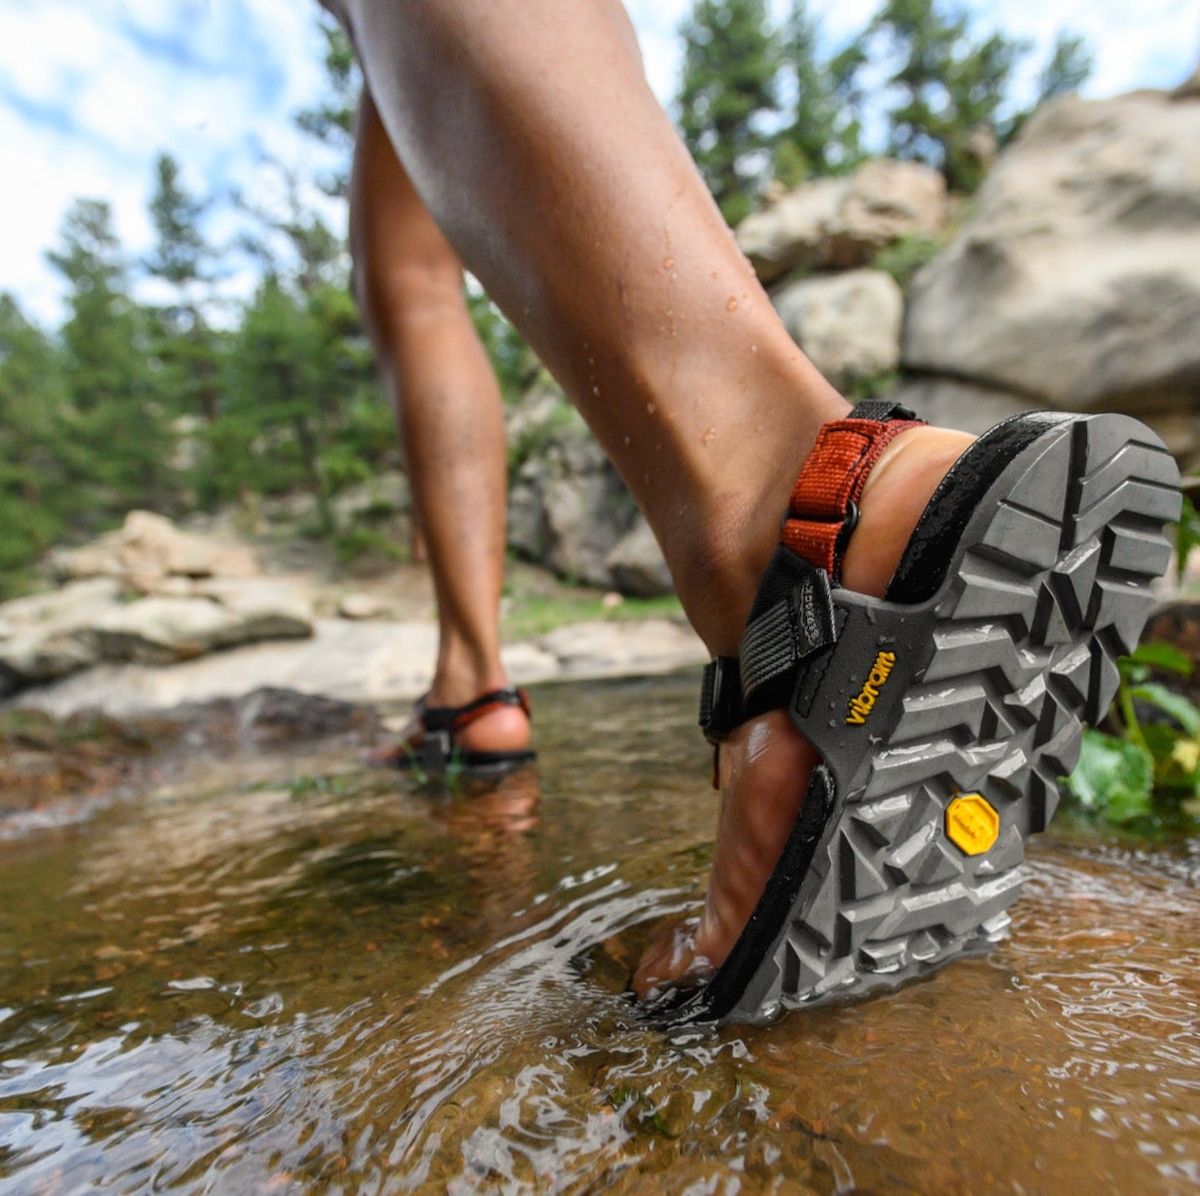 The Best Sandals Can for Hiking